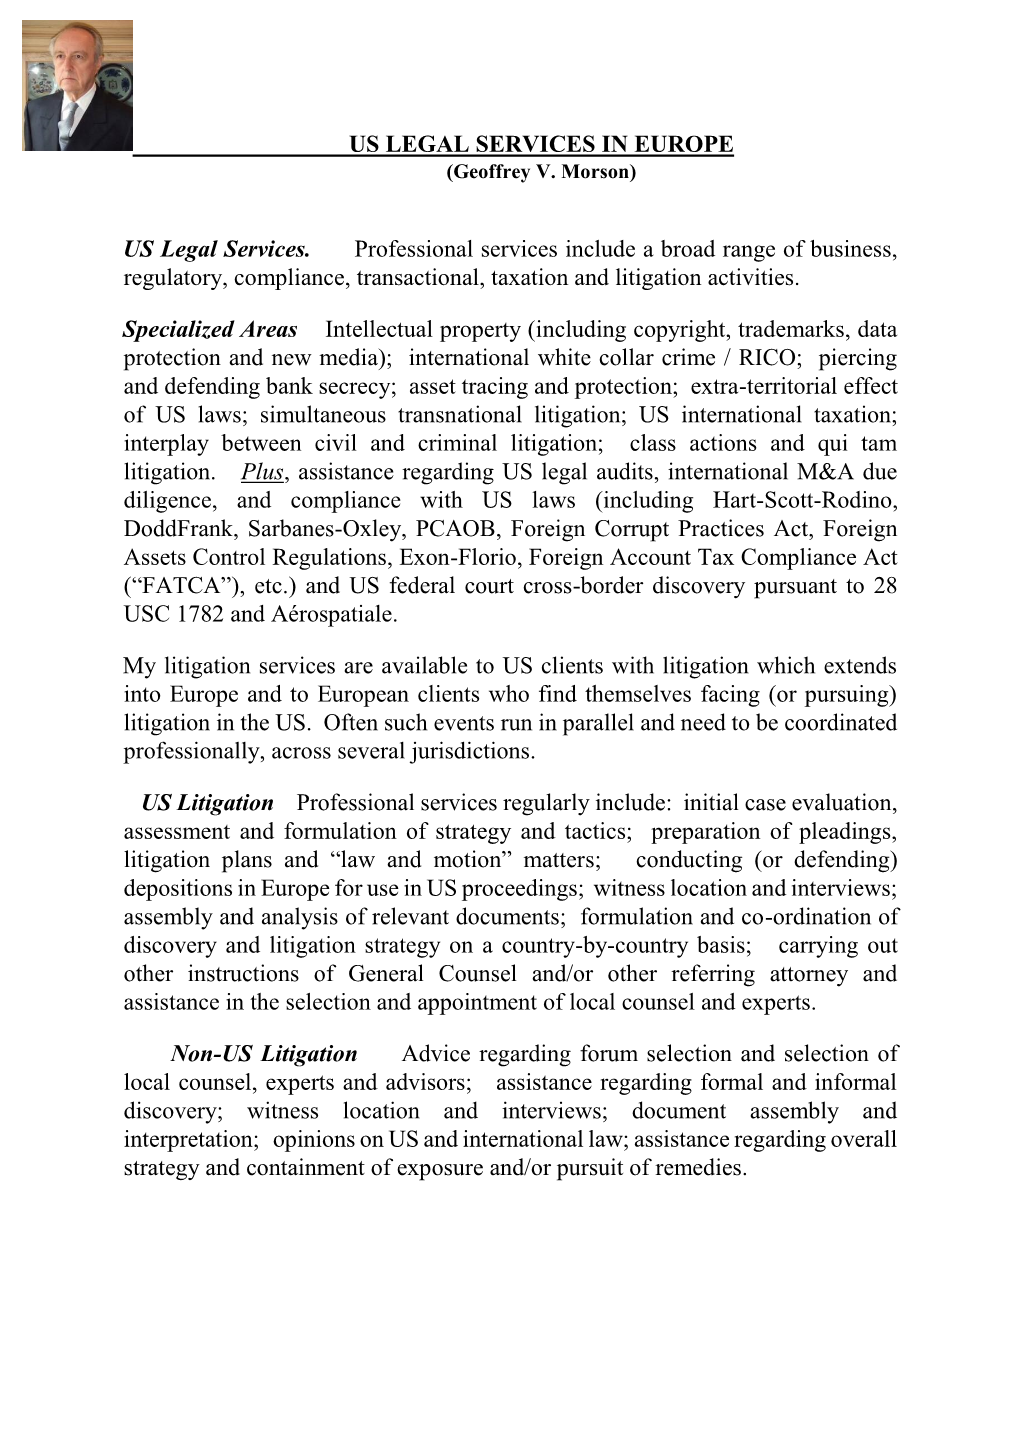 US LEGAL SERVICES in EUROPE (Geoffrey V